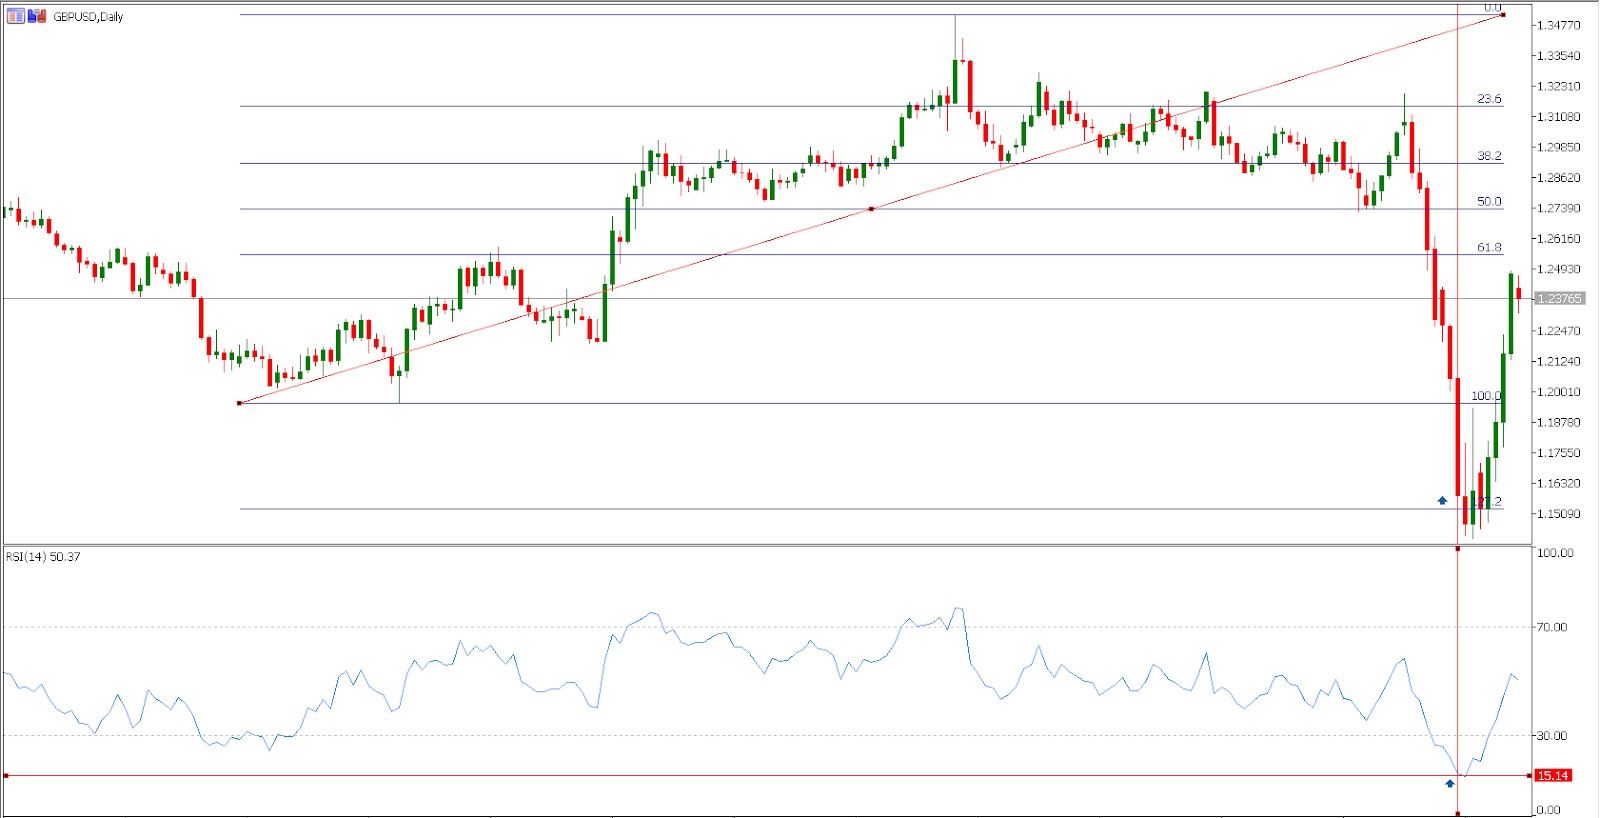 GBP/USD - trading the RSI